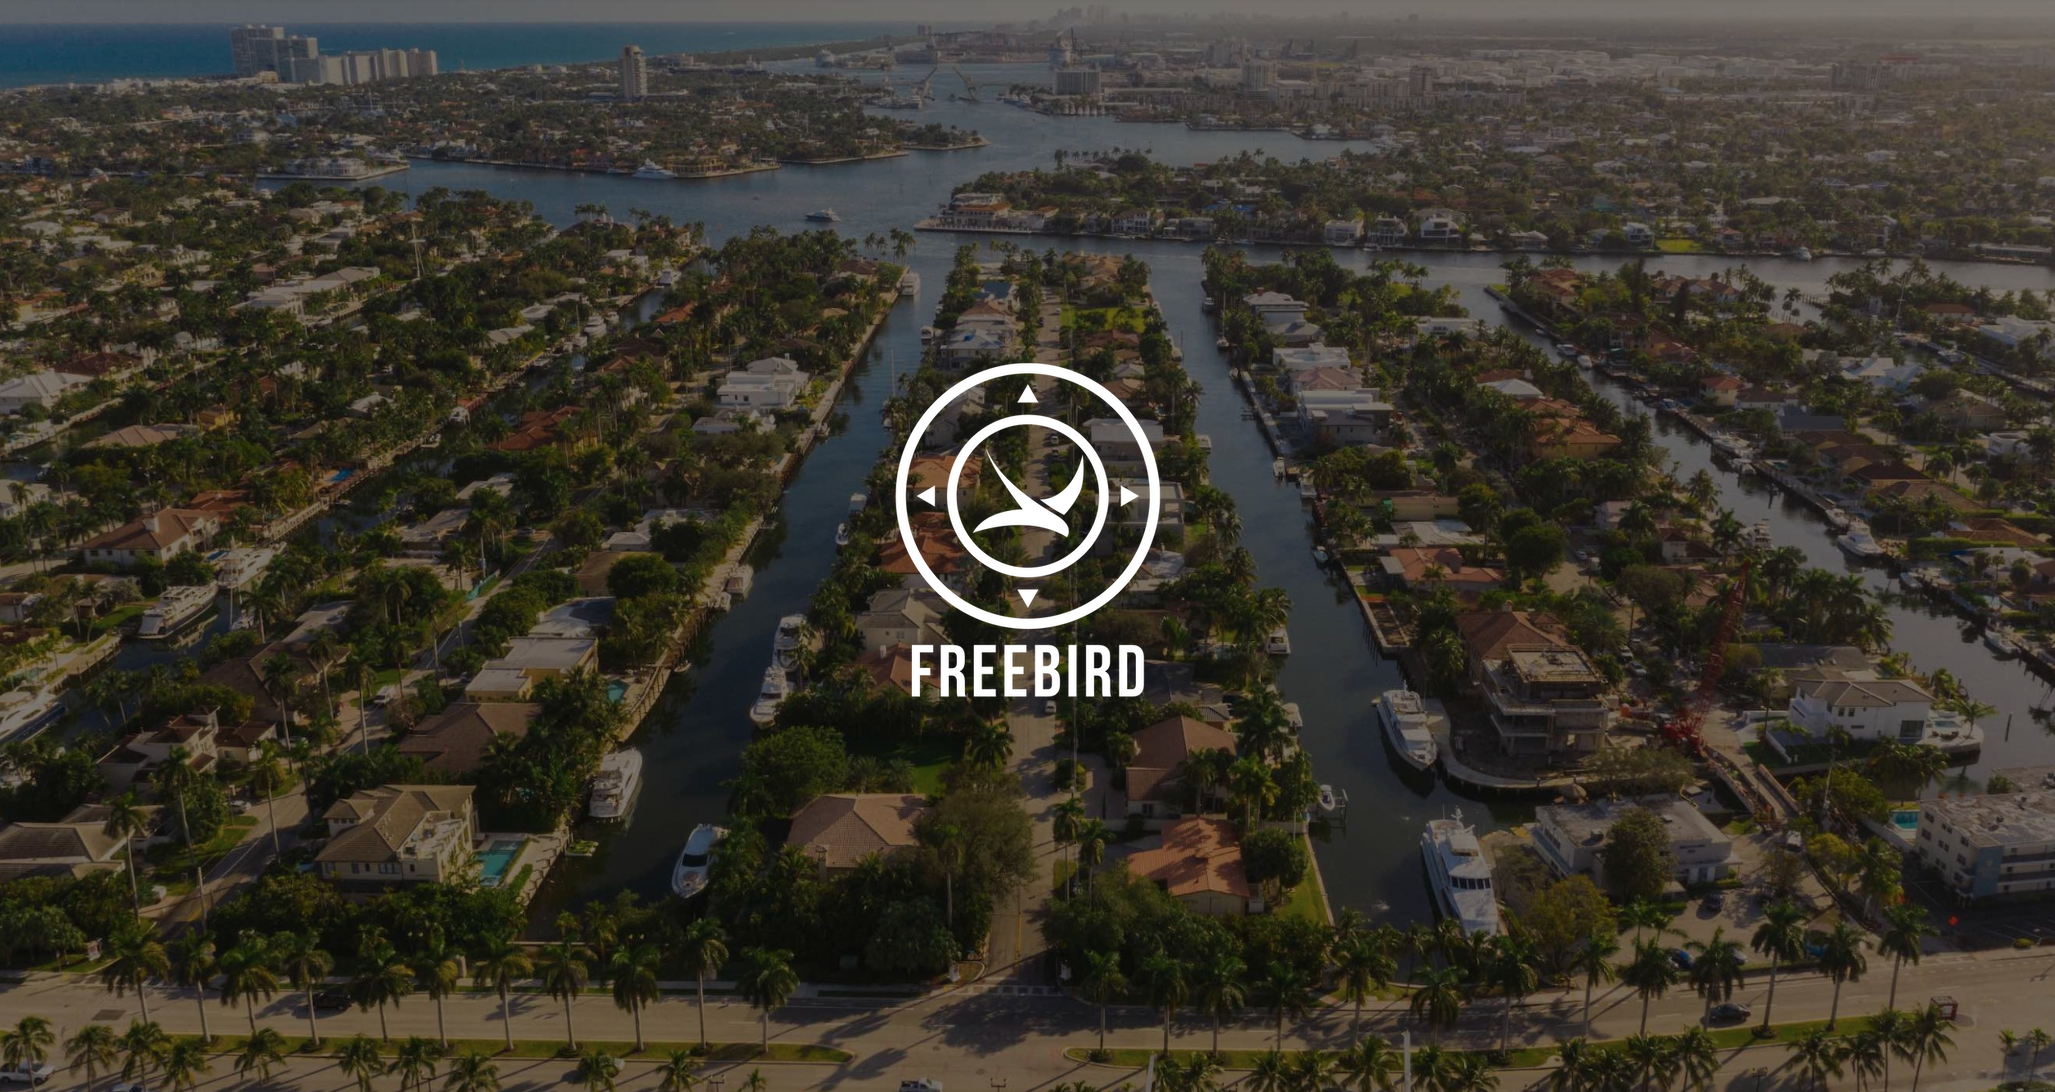 White Freebird Real Estate Fort Lauderdale Logo with background aerial of boats in canals in the city